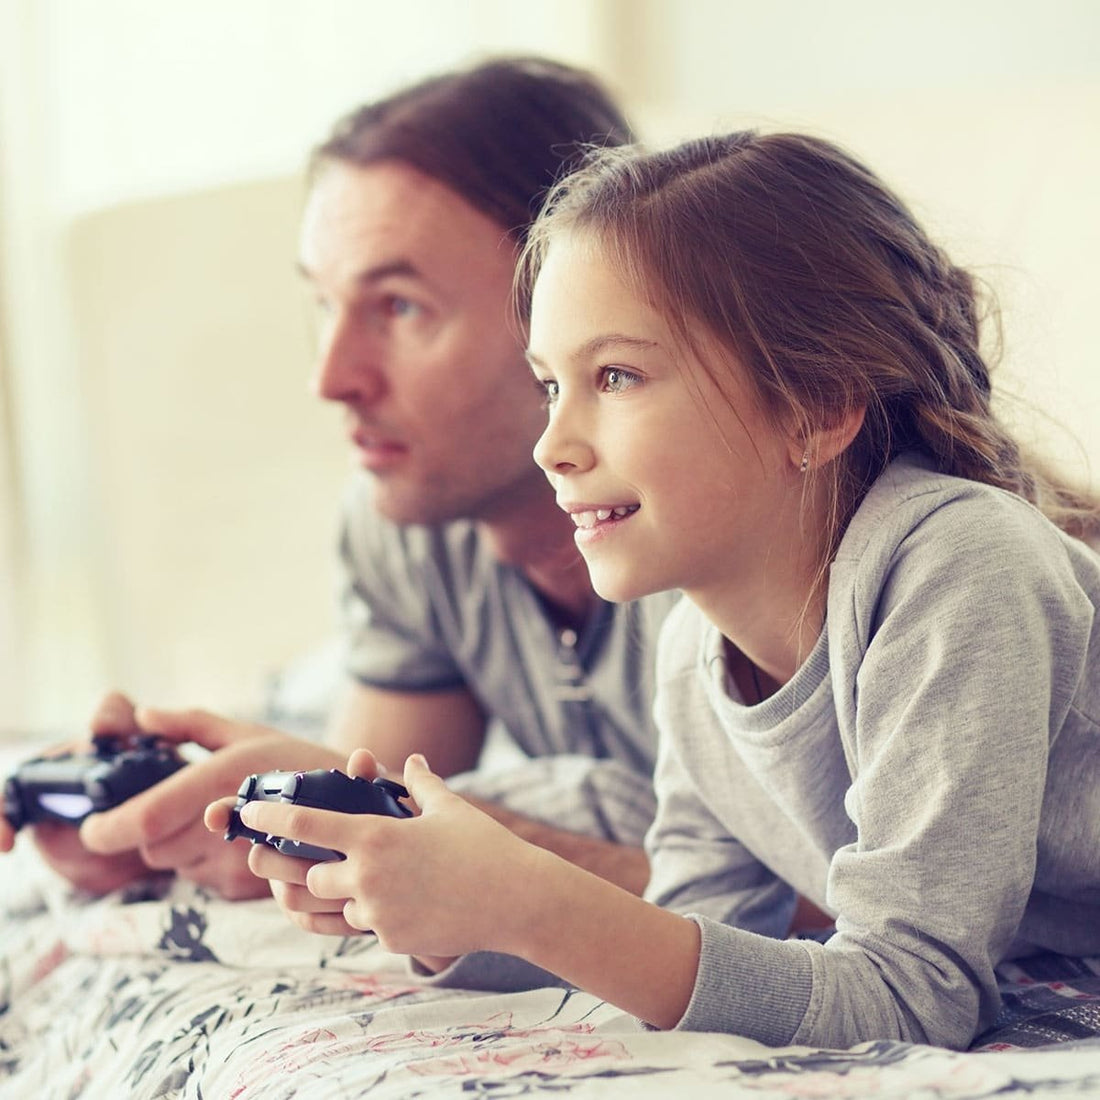 From Pixels to Power-Ups: How to Make the Most of National Video Game Day - 2P Gaming